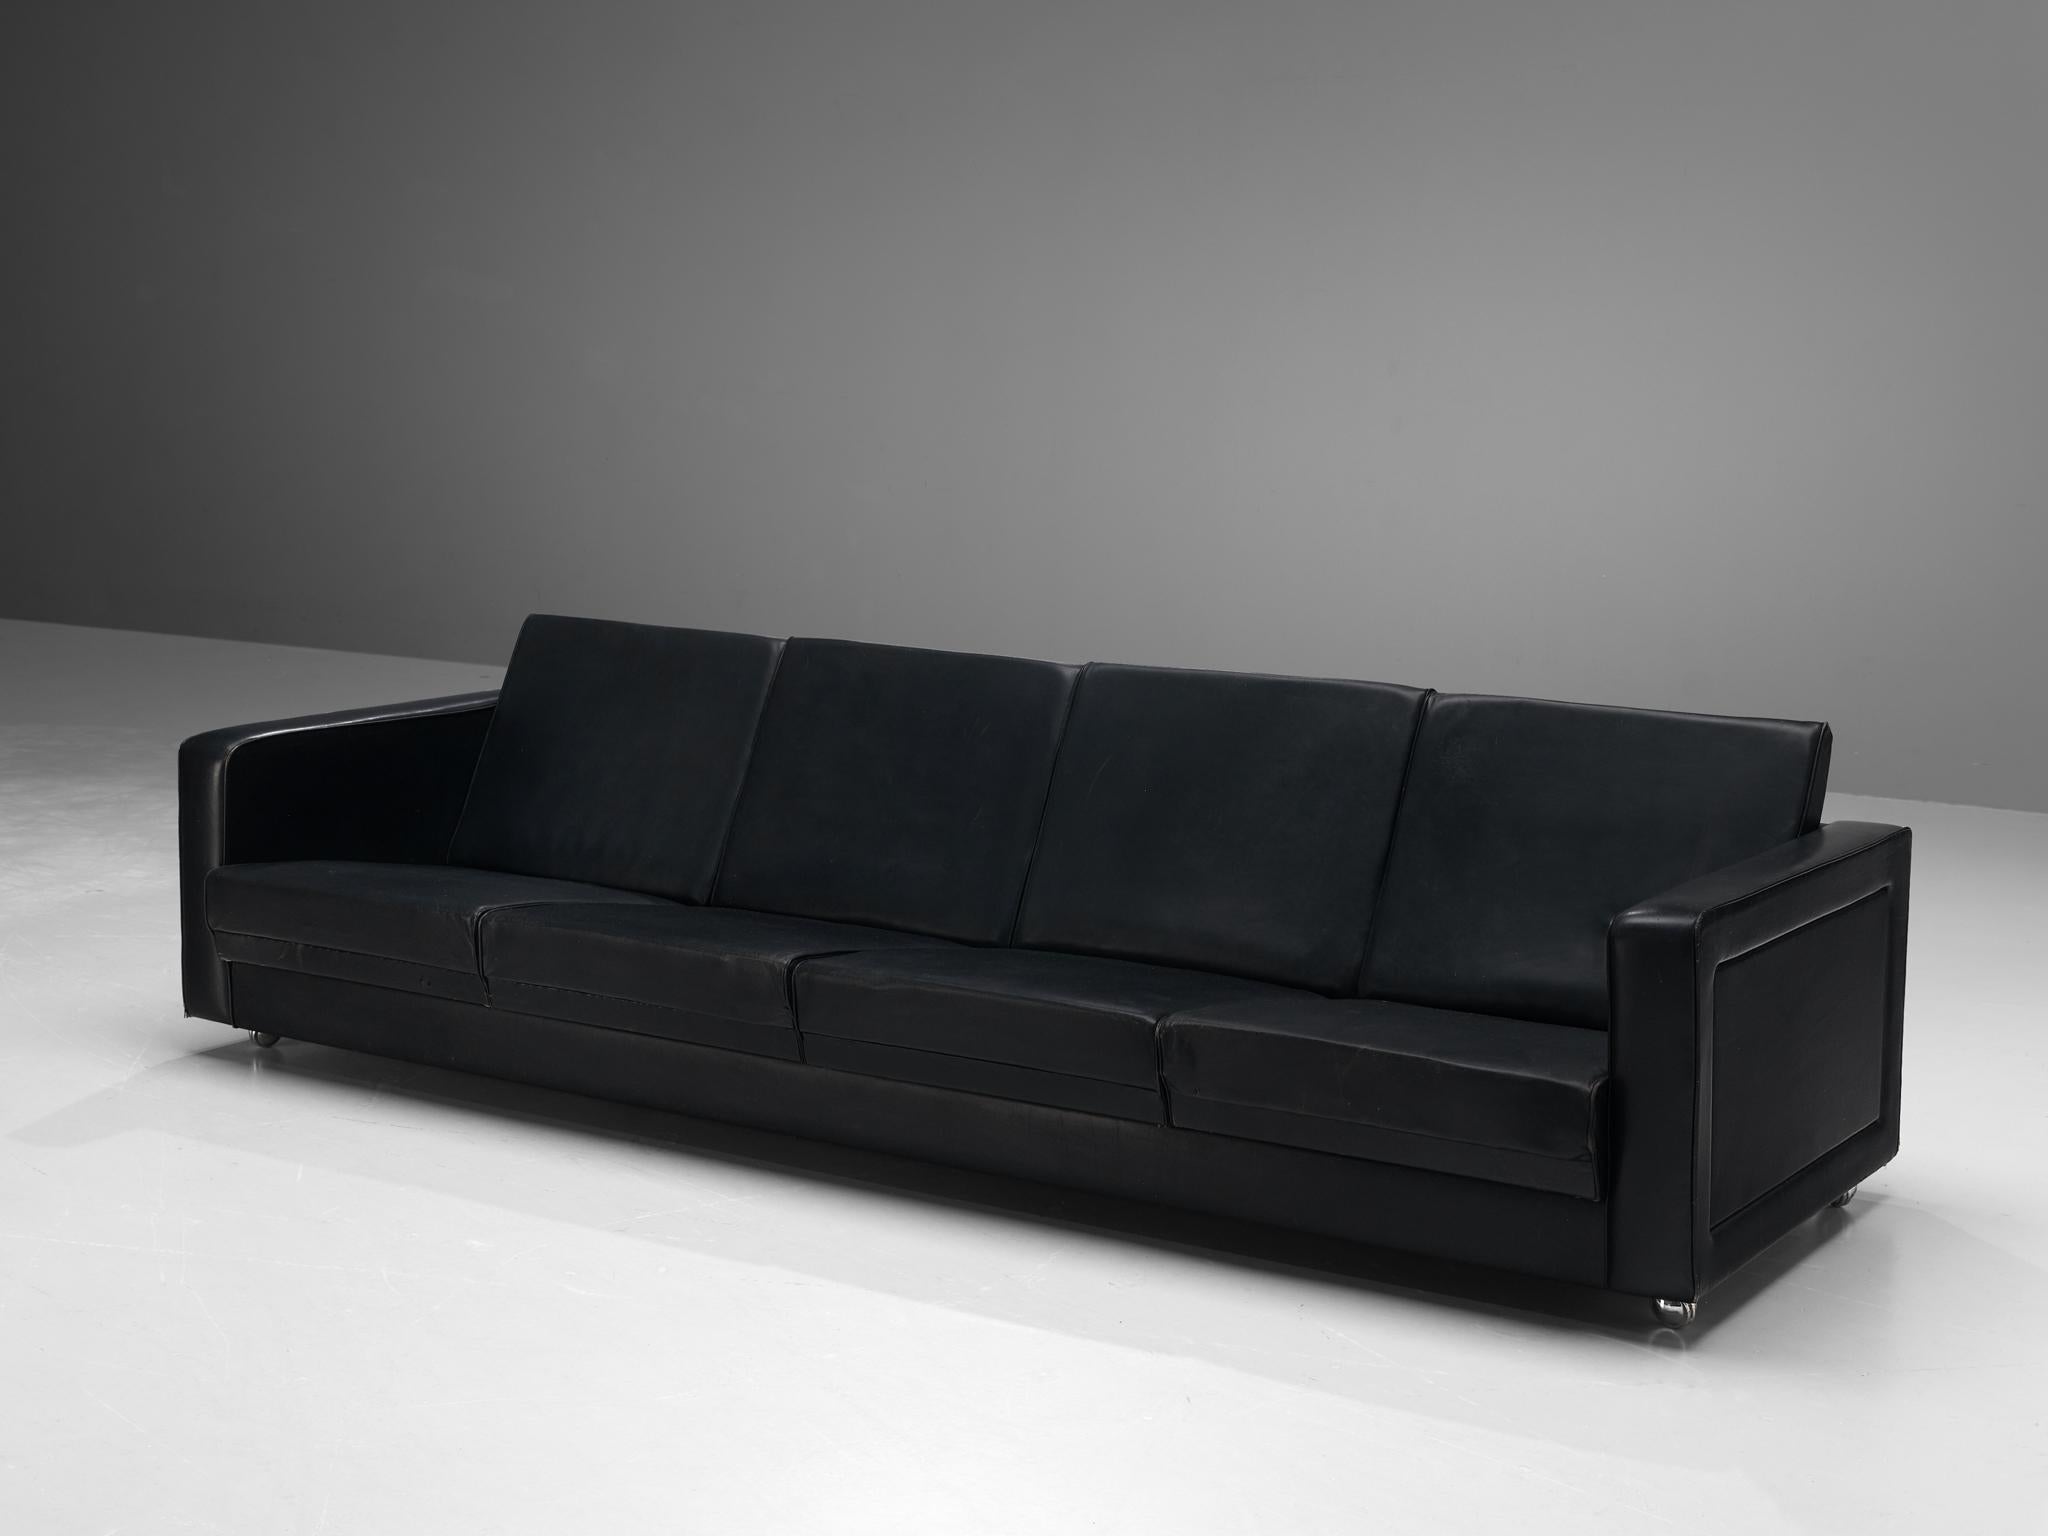 Sofa, leatherette, metal, Denmark, 1960s.

This four-seat sofa is simplistic, yet stylish in its design. Due to the overall black color of the leatherette, the sofa radiates smoothness and underlines the streamlined design. Therefore, it enhances